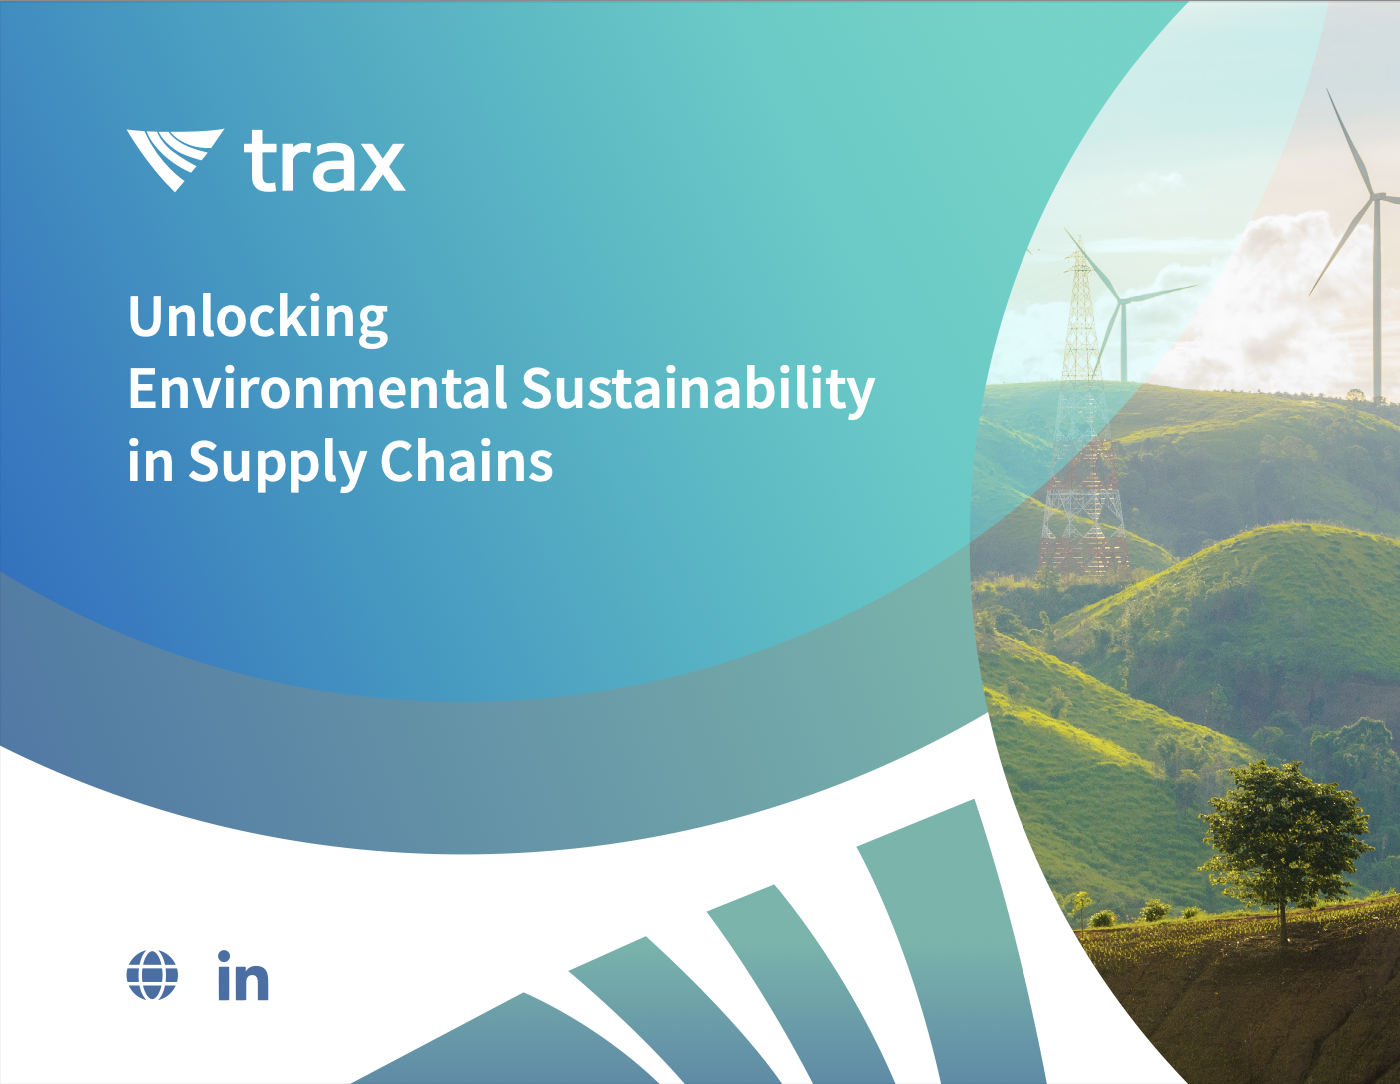 “Unlocking Environmental Sustainability in Supply Chains”